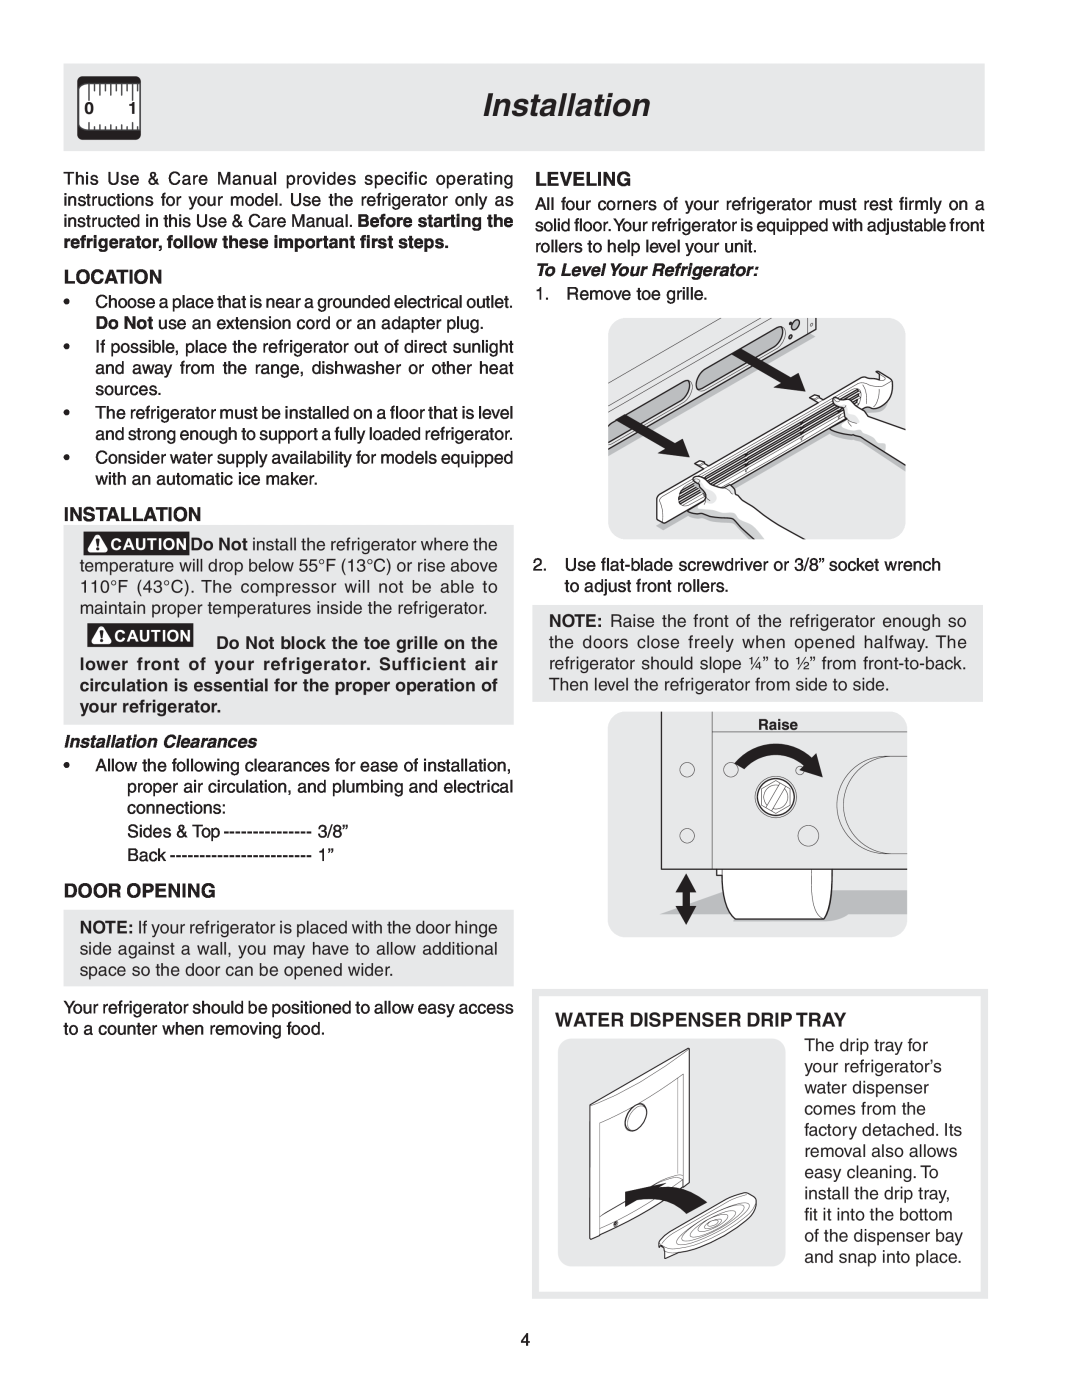 Frigidaire 241567601 manual Location, Door Opening, Leveling, Water Dispenser Drip Tray, Installation Clearances 